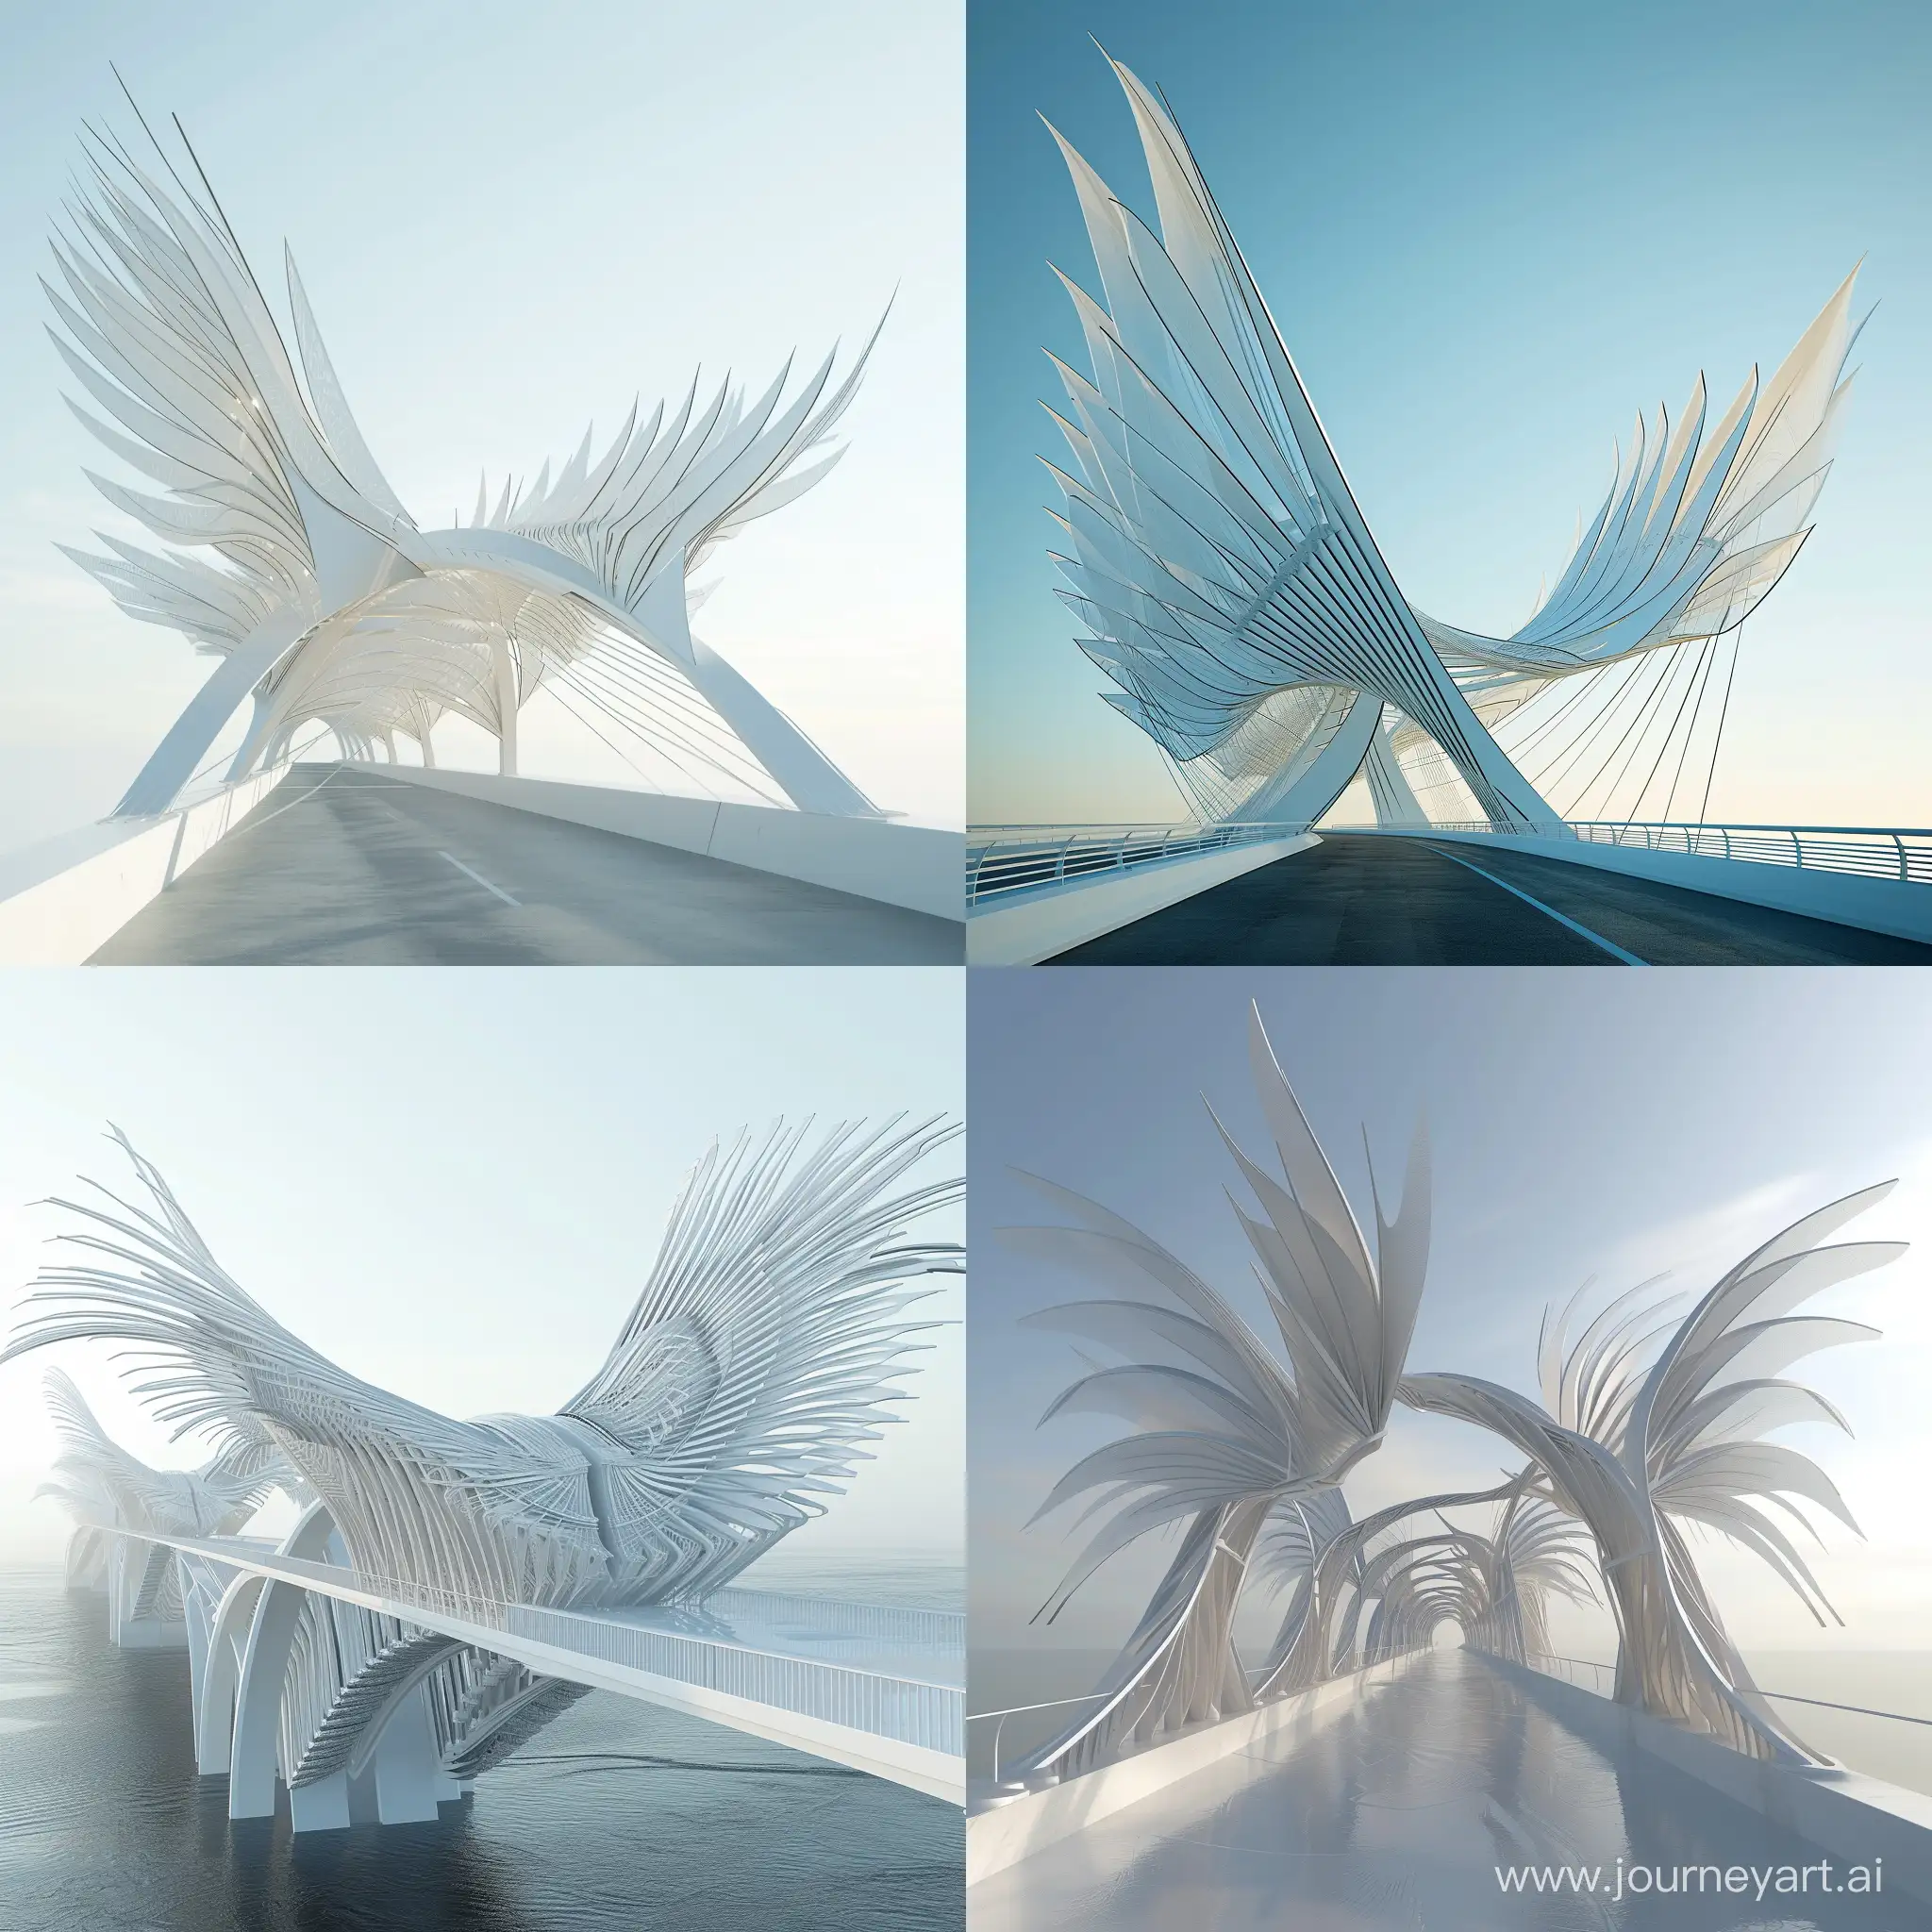 Generate a 3D bridge inspired by Santiago Calatrava with his kinetic approach. Picture an elegant bridge that mimics the motion of wings in flight, incorporating moving parts that respond to wind currents. The architecture should embody Calatrava’s ability to create structures that merge engineering precision with artistic expression.